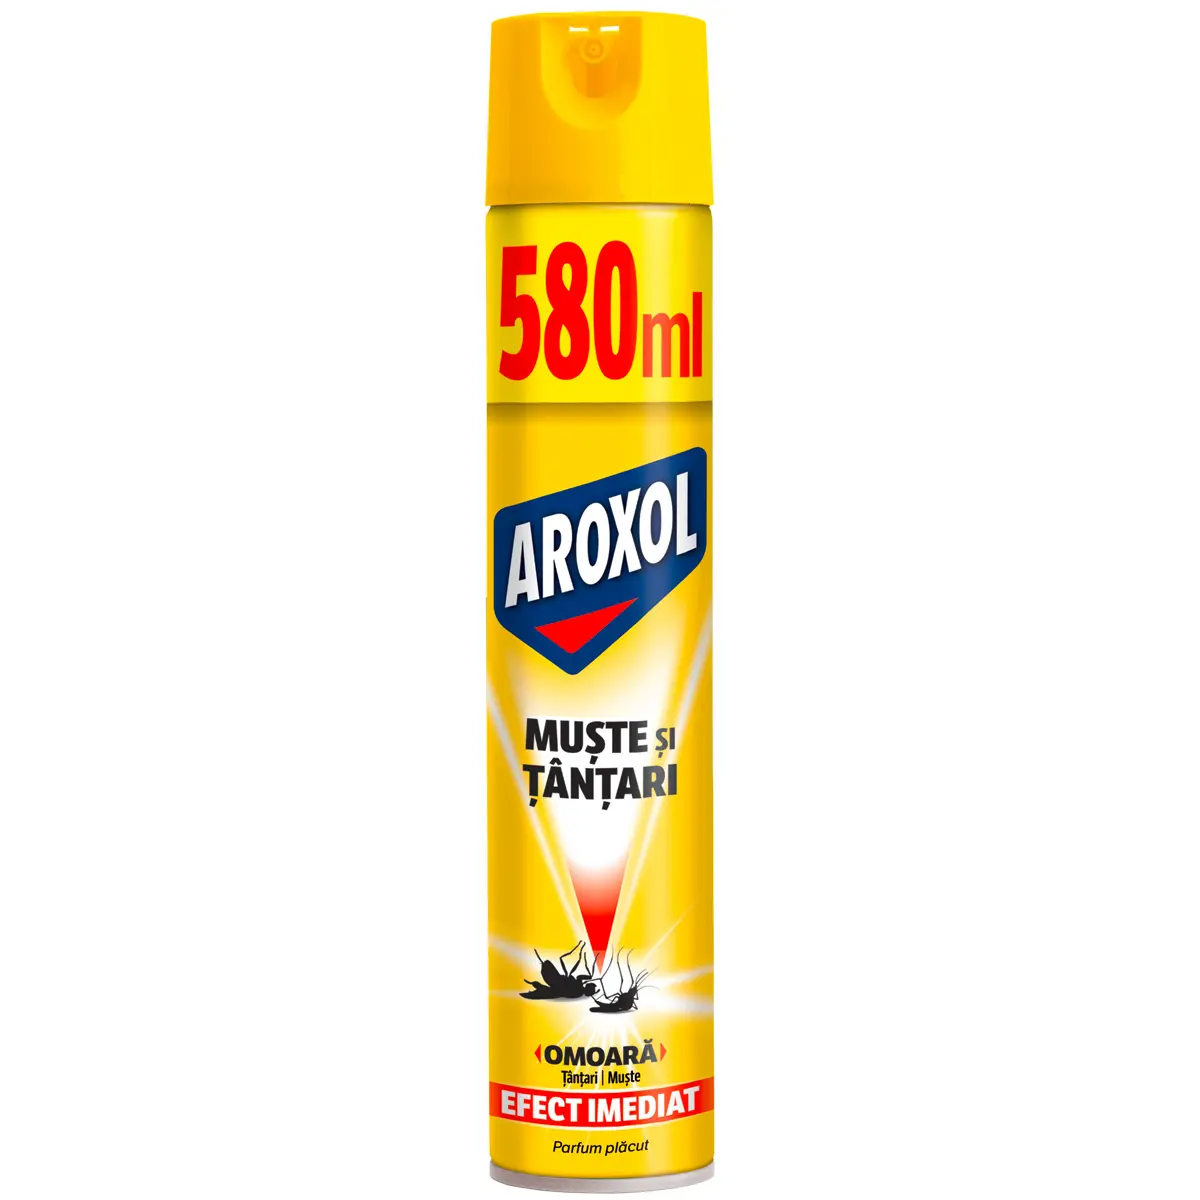 Spray insecticid impotriva mustelor si tantarilor, Aroxol 580ml